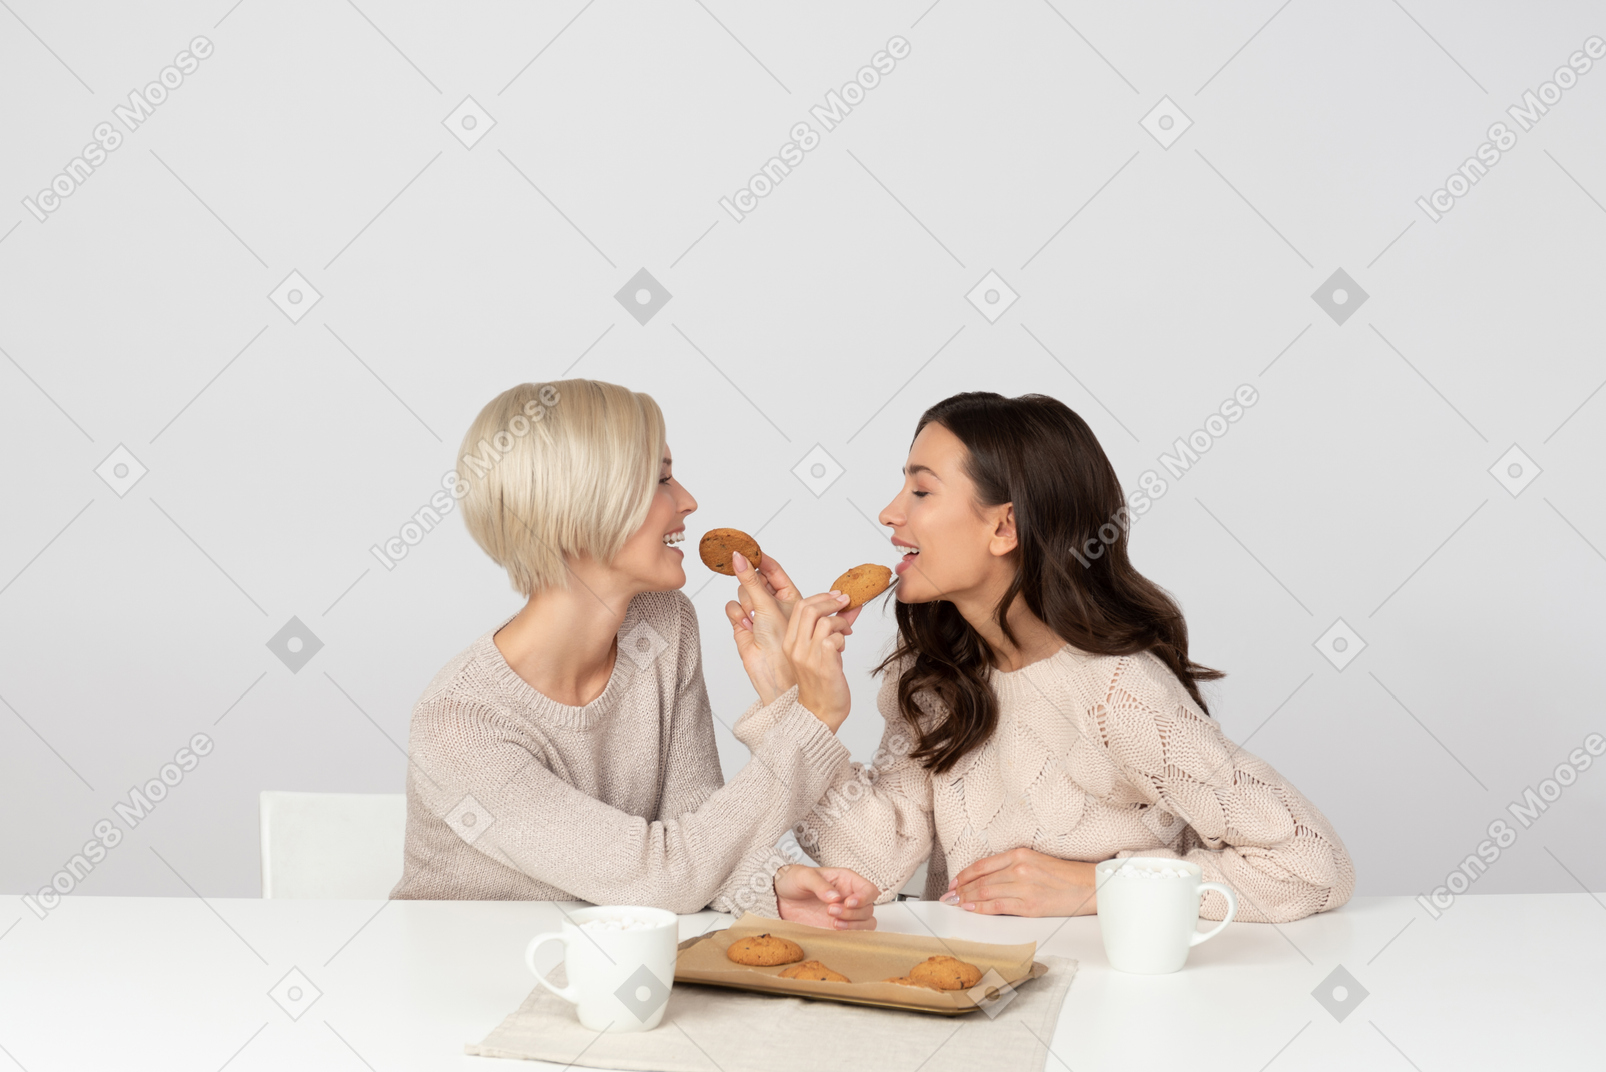 Young women feeding each other with cookies